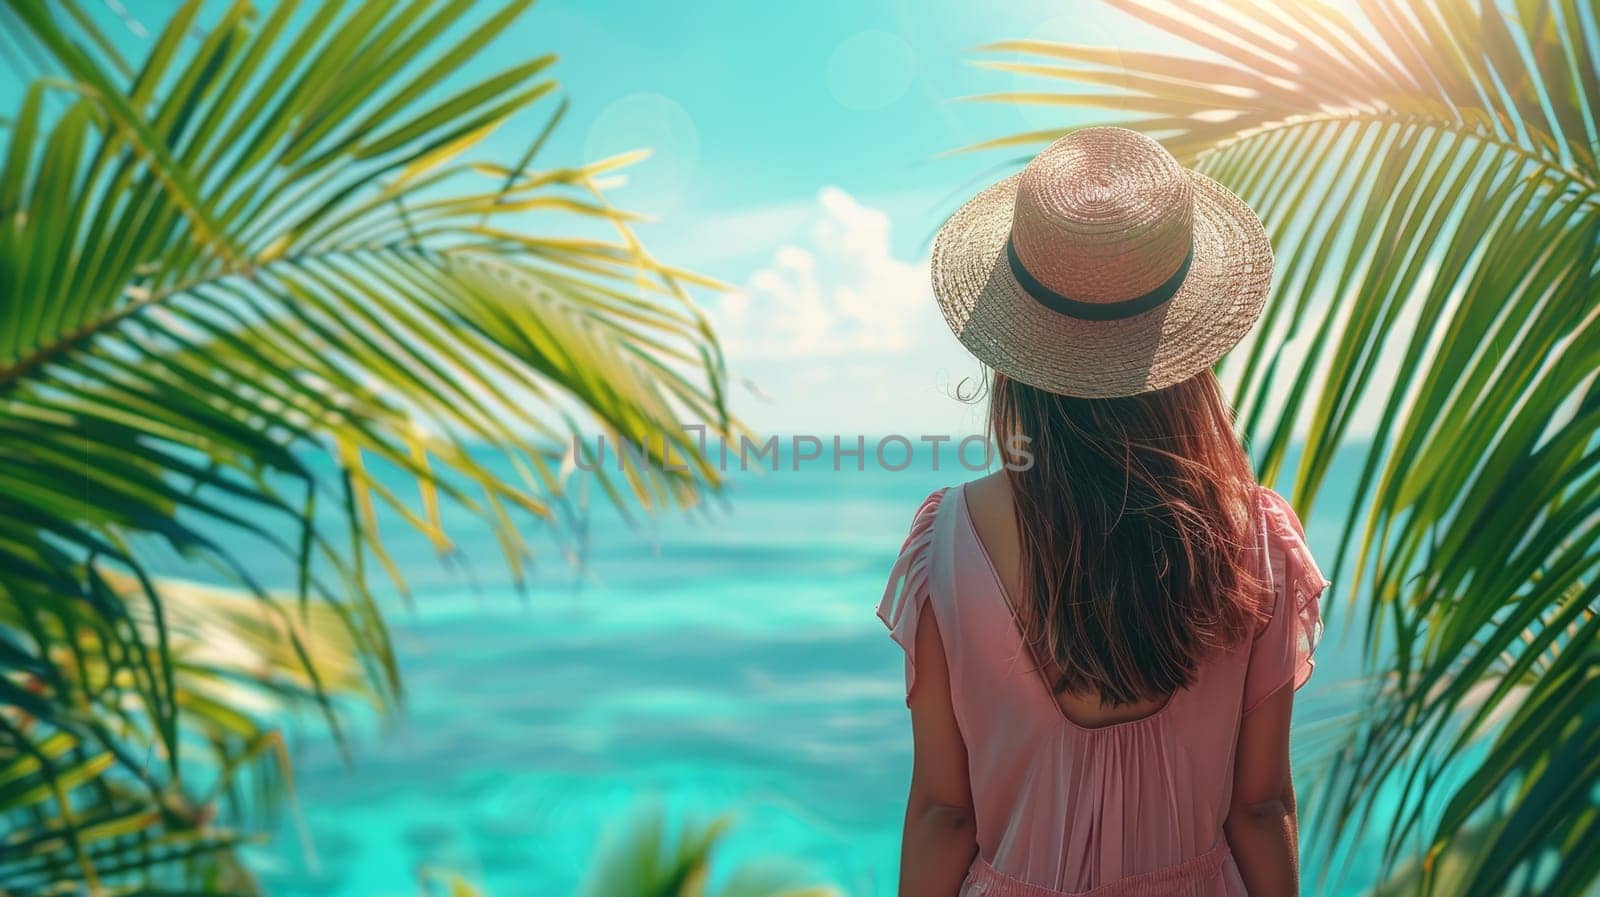 Tropical coast, beach. A girl in a hat overlooking the sea. Sea view. Summer day by Lobachad